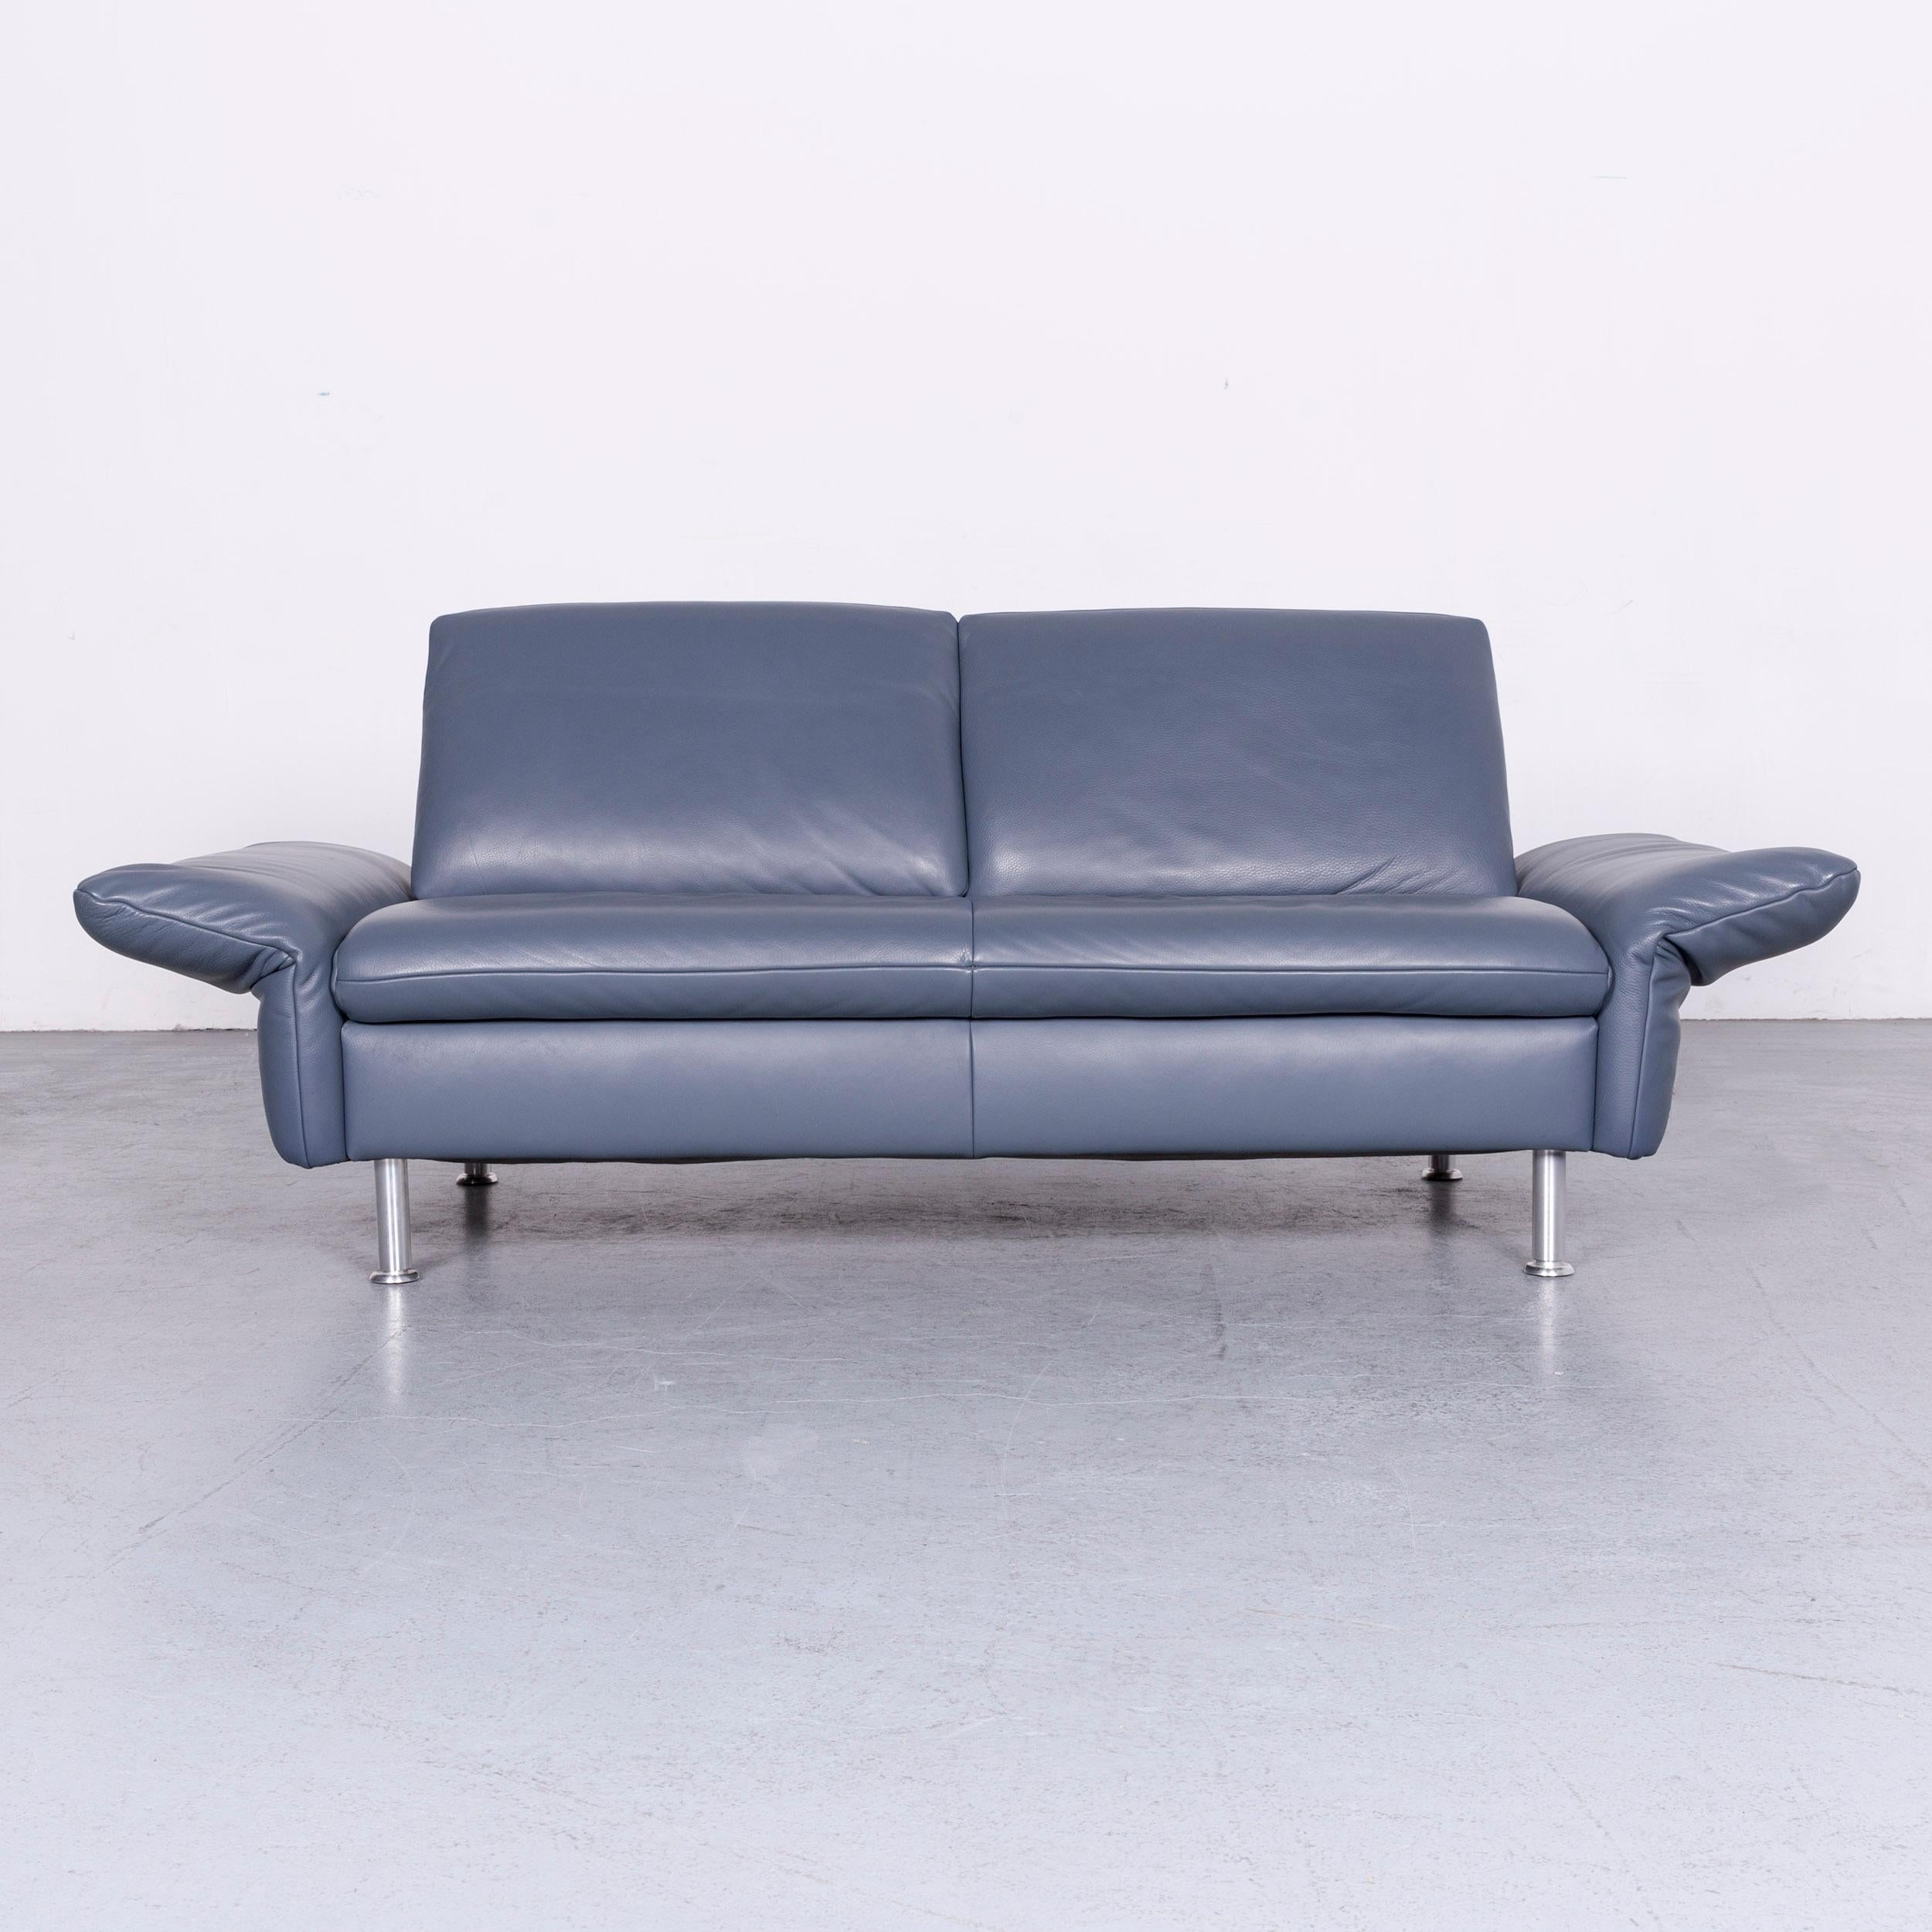 We bring to you a Koinor designer two-seat sofa armchair footstool set blue leather.